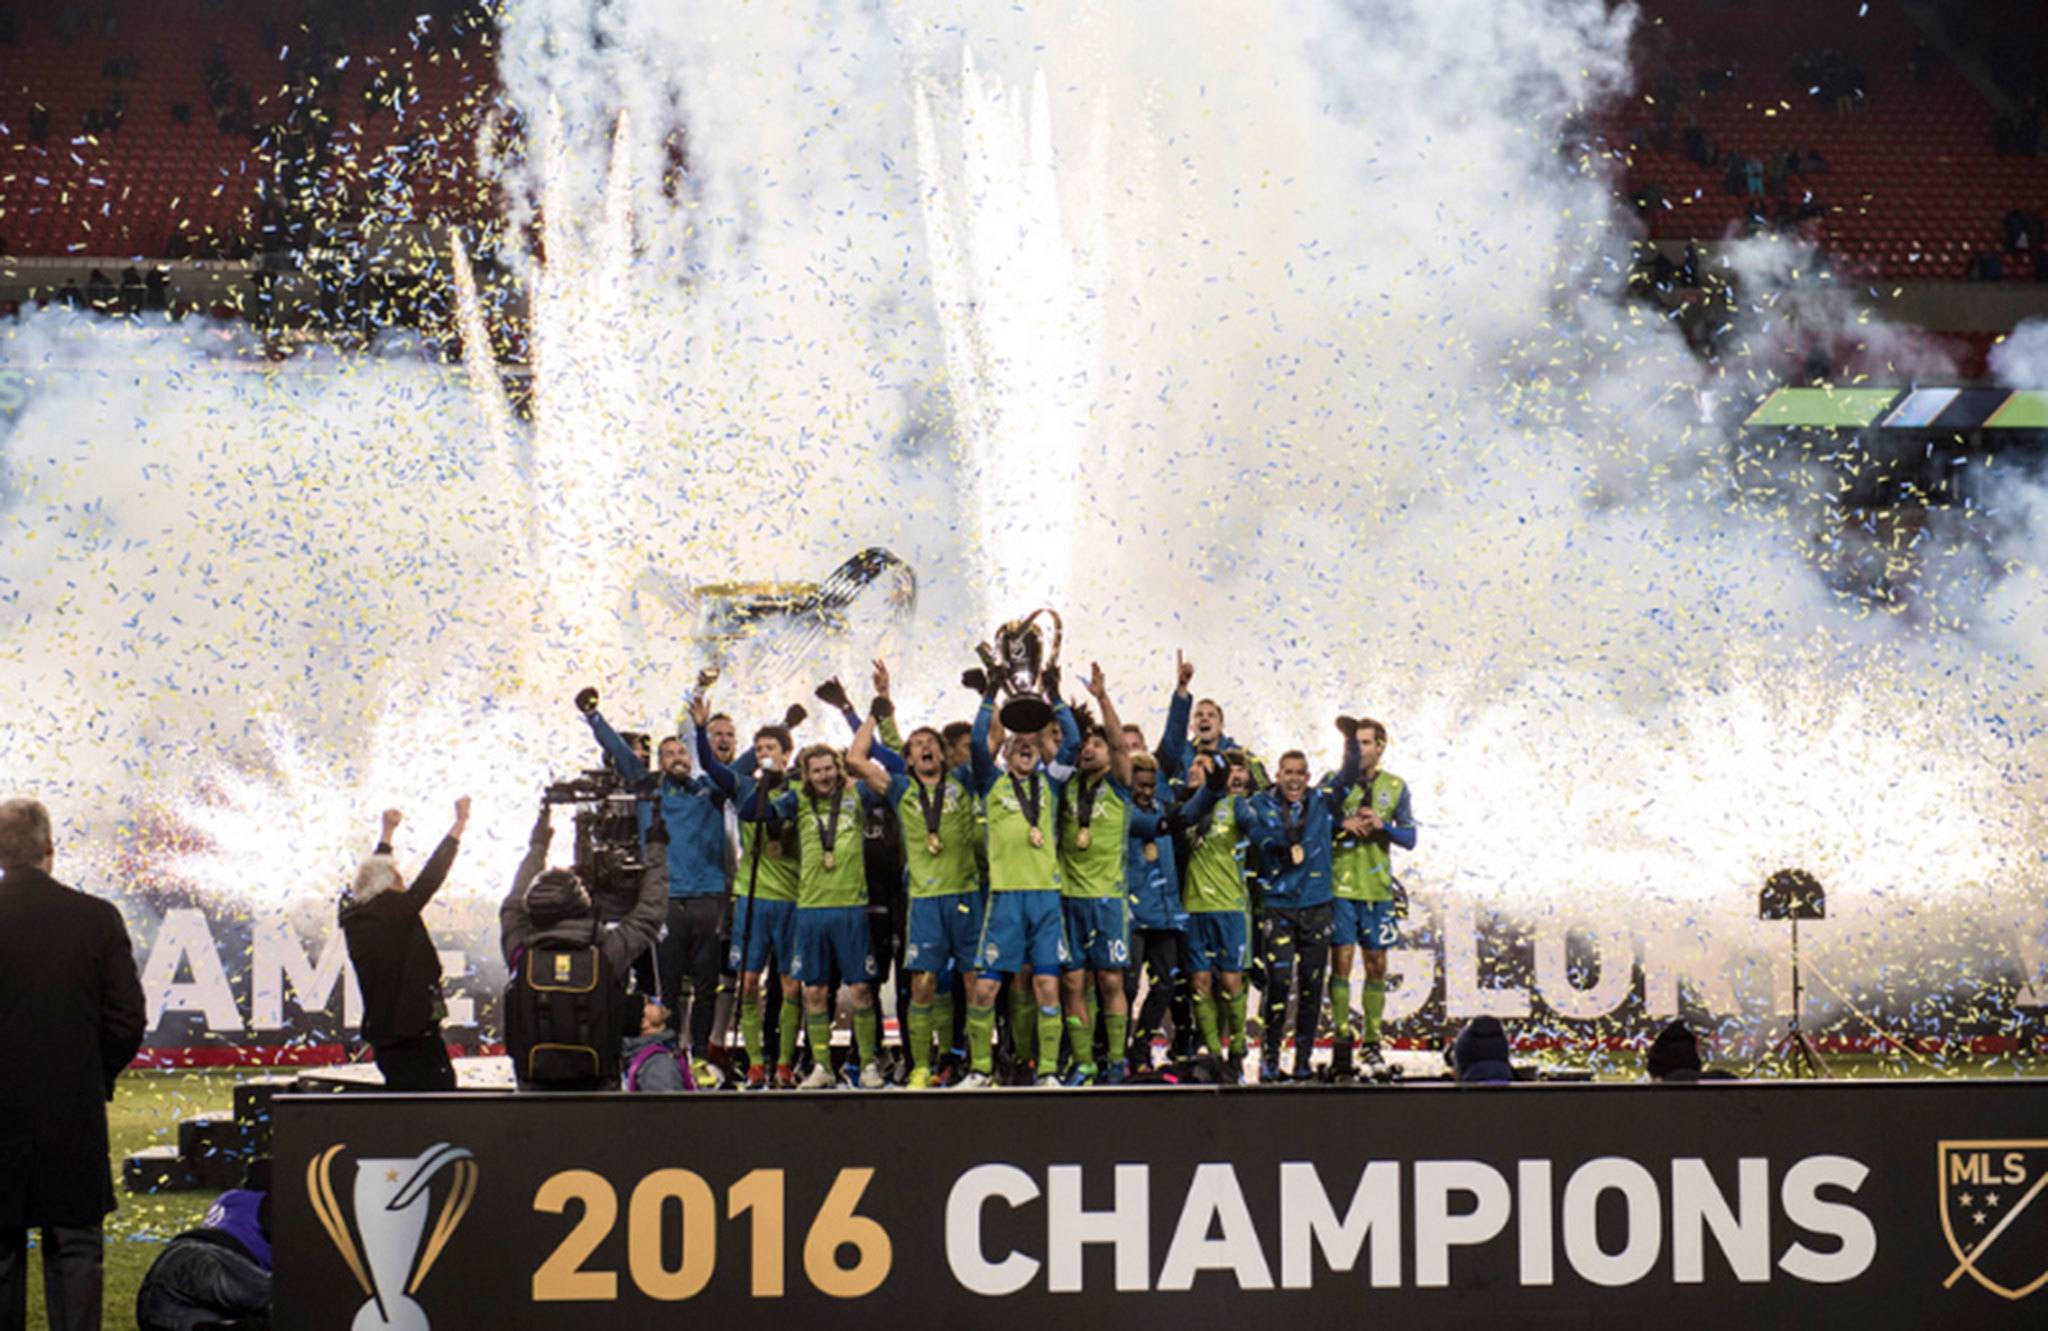 Jordan Morris and the Seattle Sounders FC took the stage and the championship on Dec. 10 in Toronto. Photo courtesy of Jane Gershovich/Sounders FC Communications.